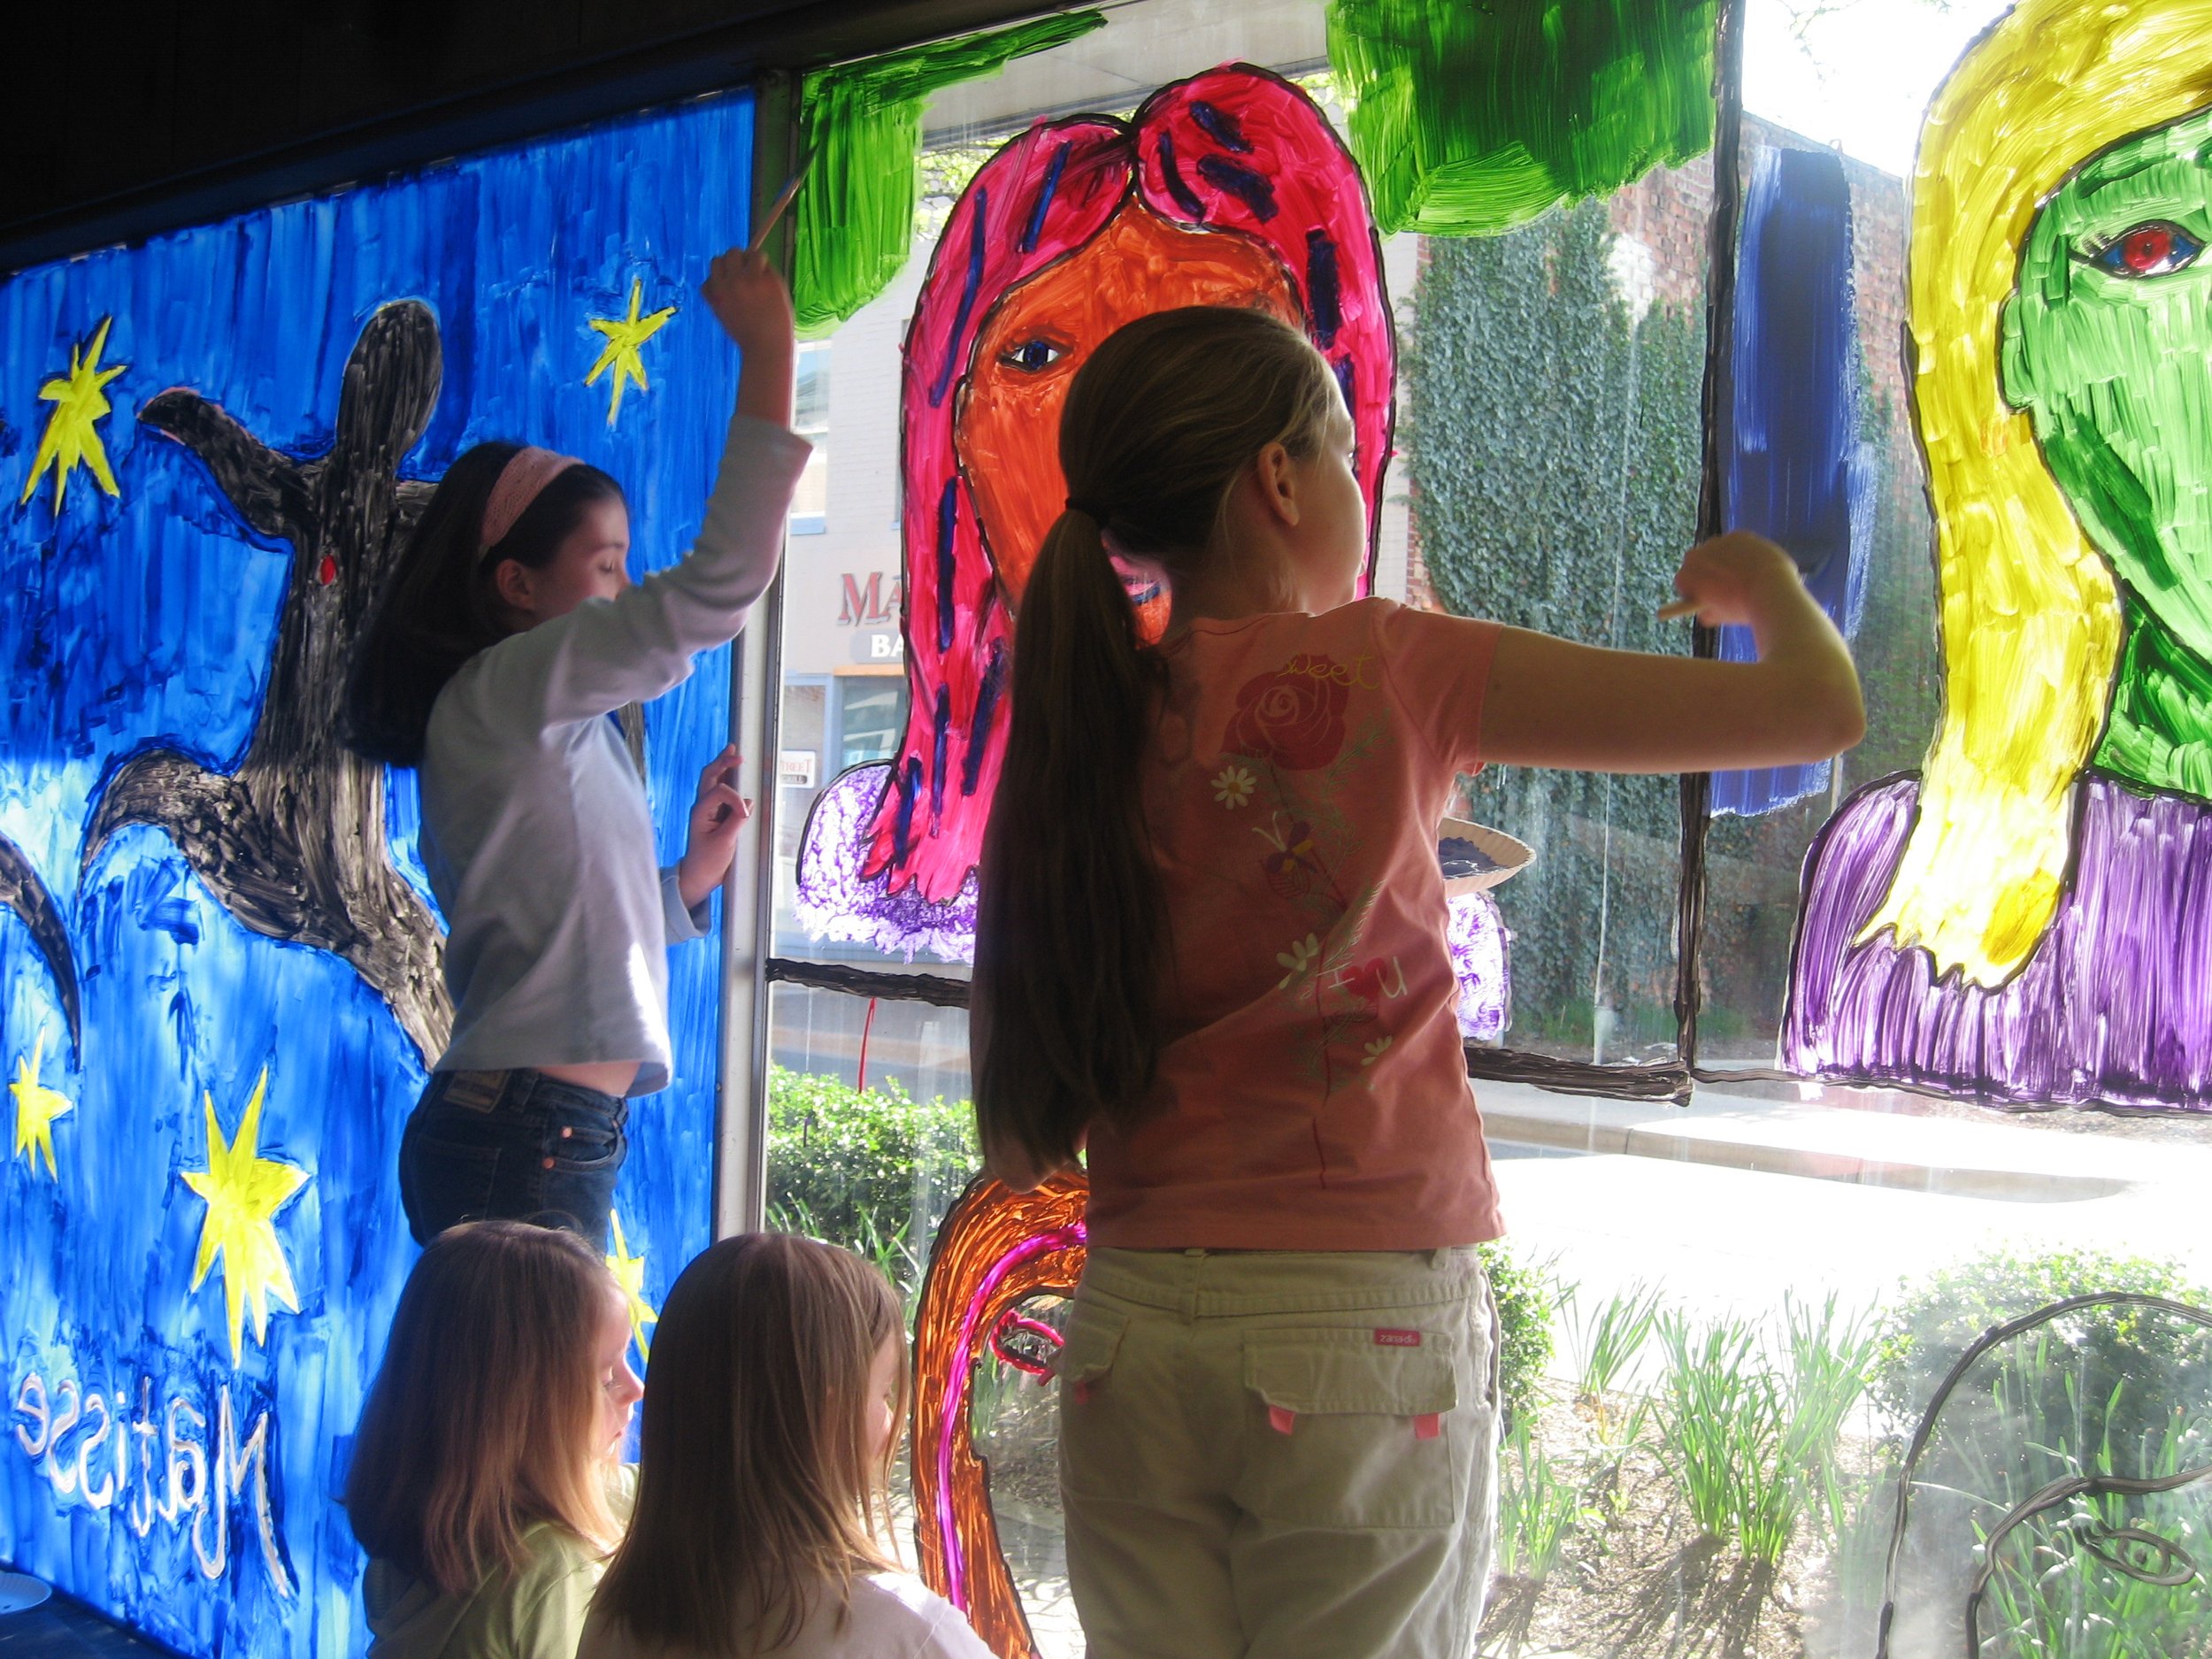  Before the Museum had funds to renovate its permanent home, it sat empty. Kids painted murals in the vacant storefront windows to provide visual interest for downtown visitors.  